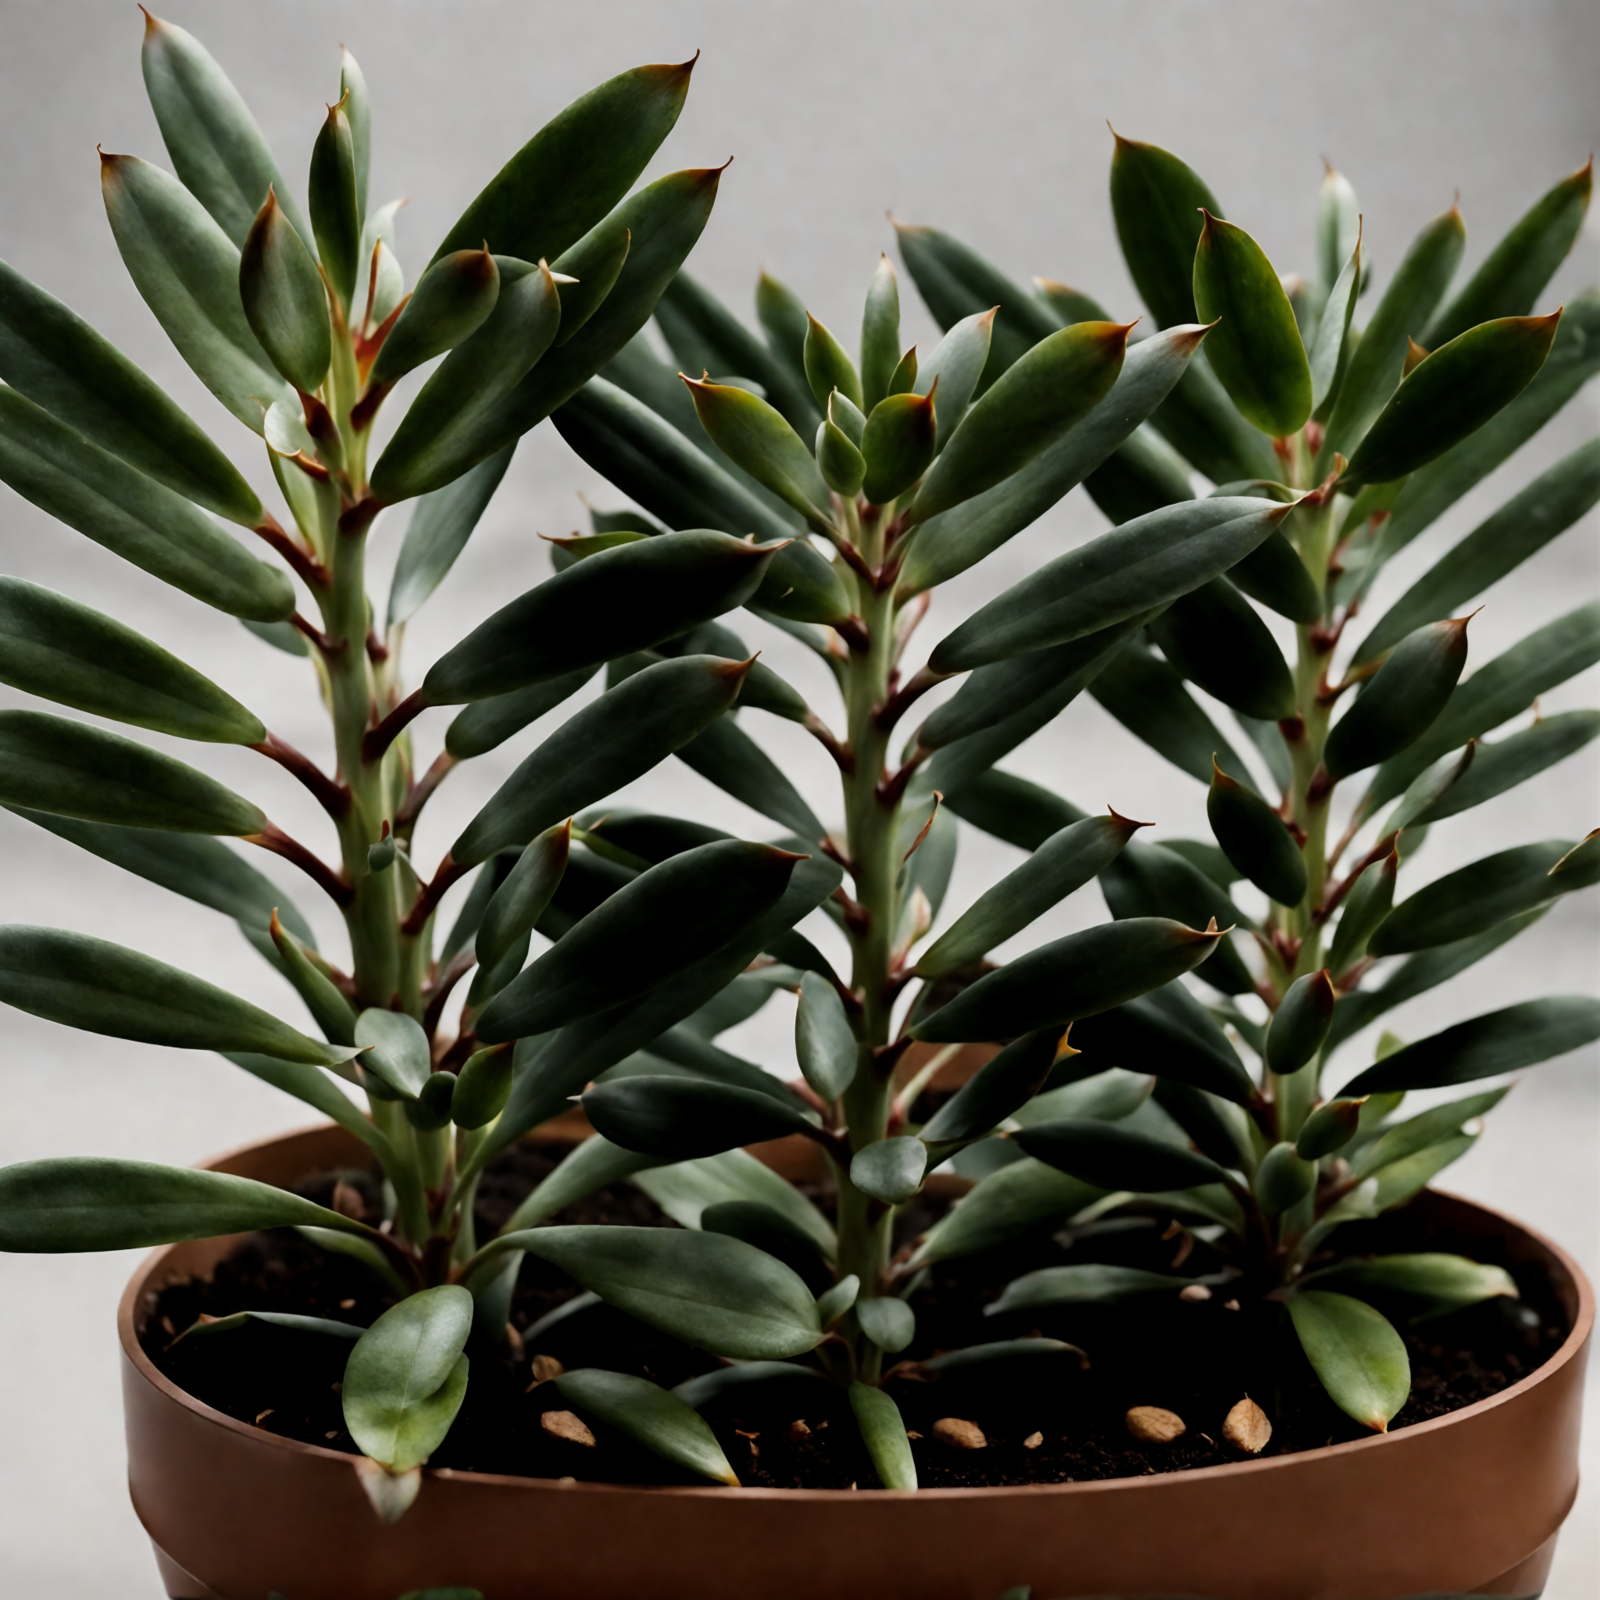 Senecio crassissimus in a planter, with thick, upright leaves, against a dark background in clear, neutral lighting.